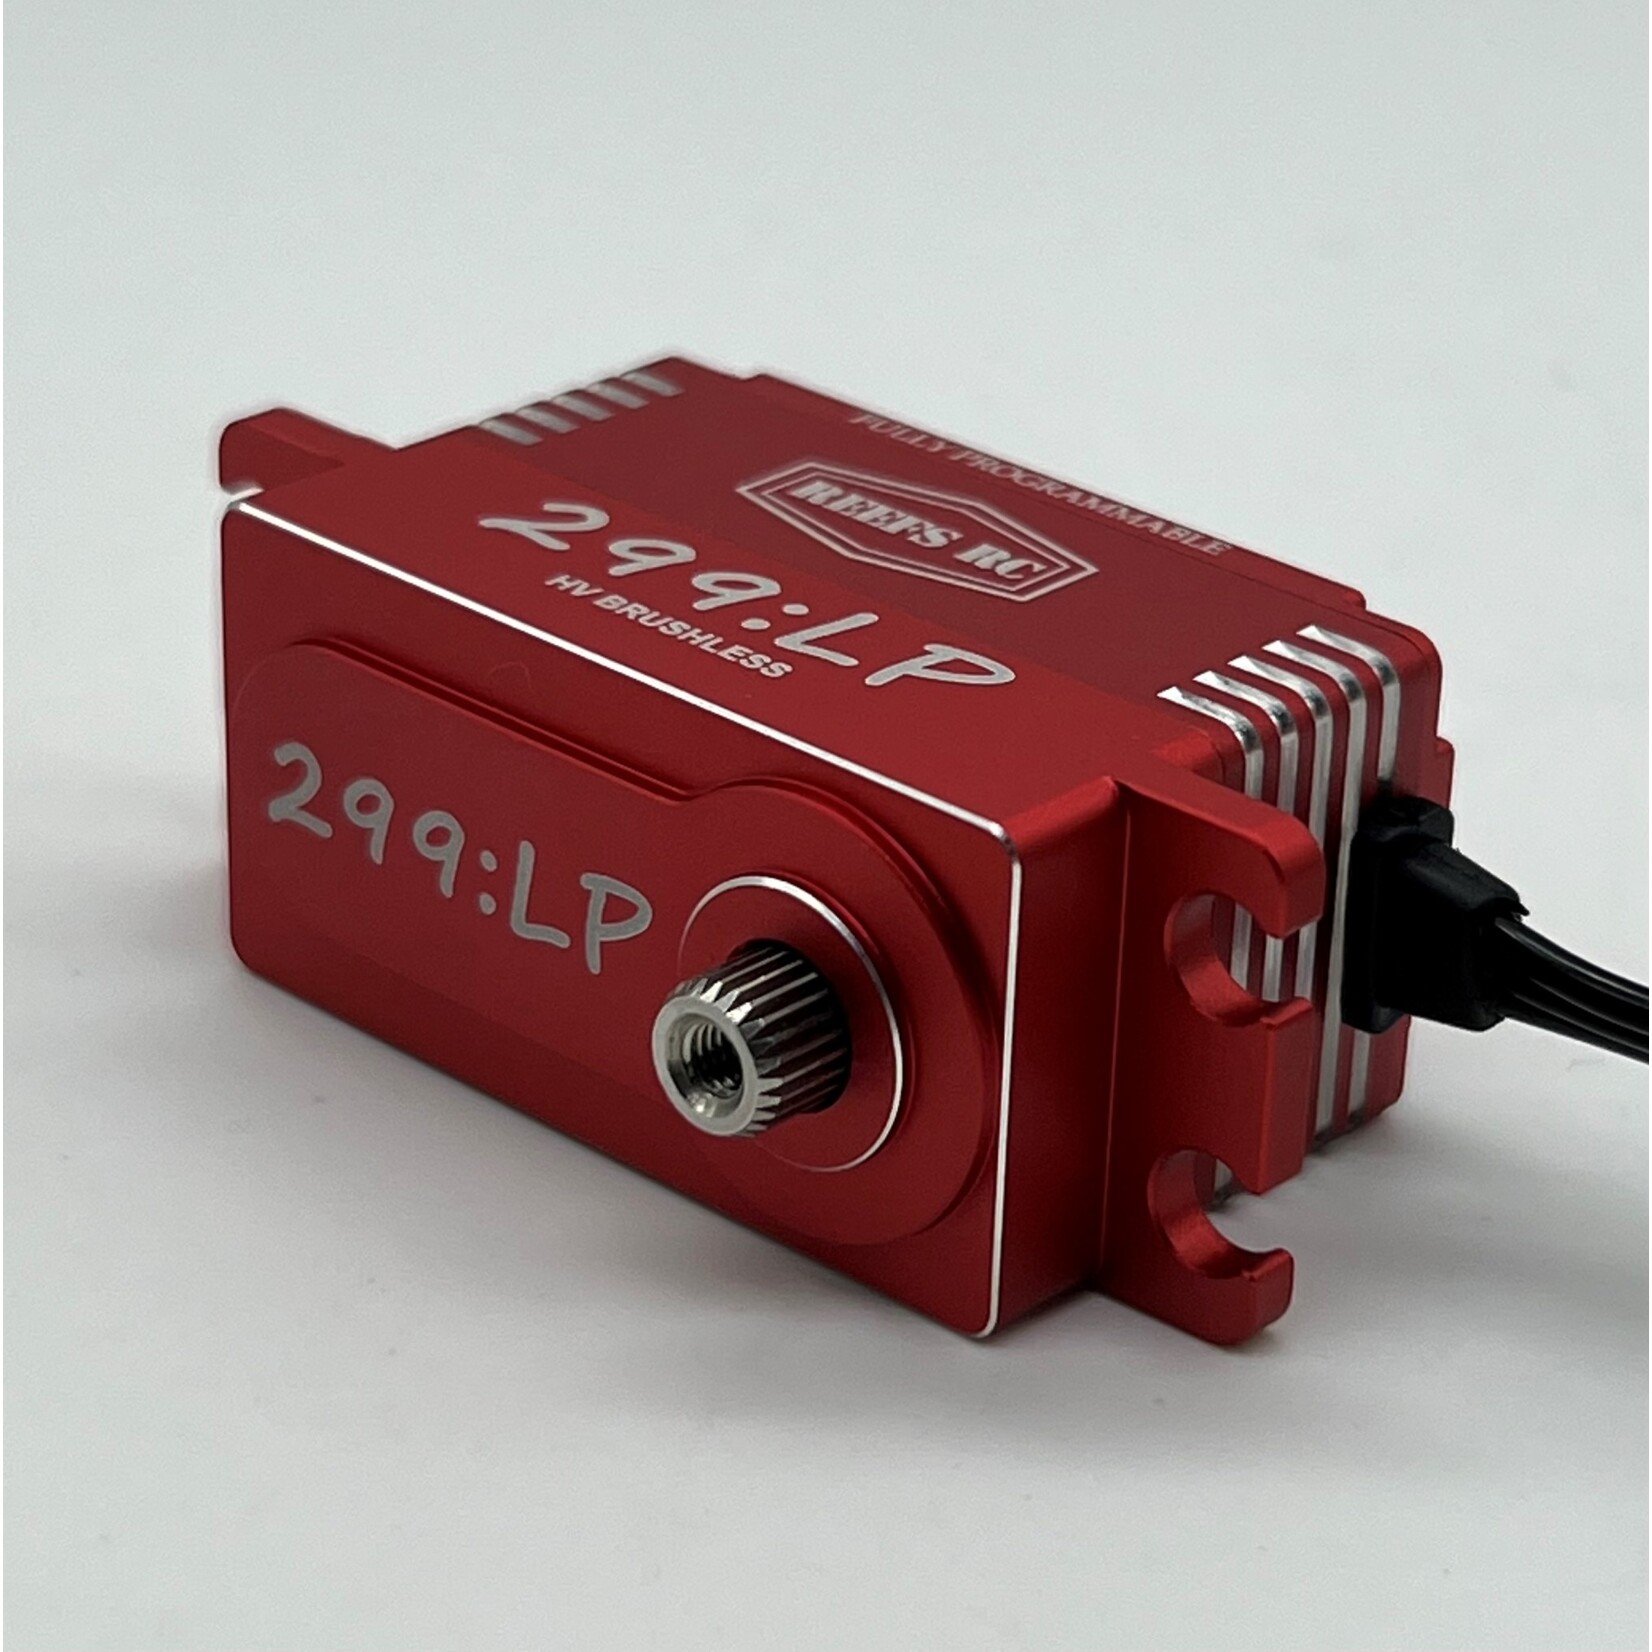 Reefs RC Reefs RC 299LP High Torque/Speed Brushless Low Profile Servo (High Voltage) (Red) #REEFS130